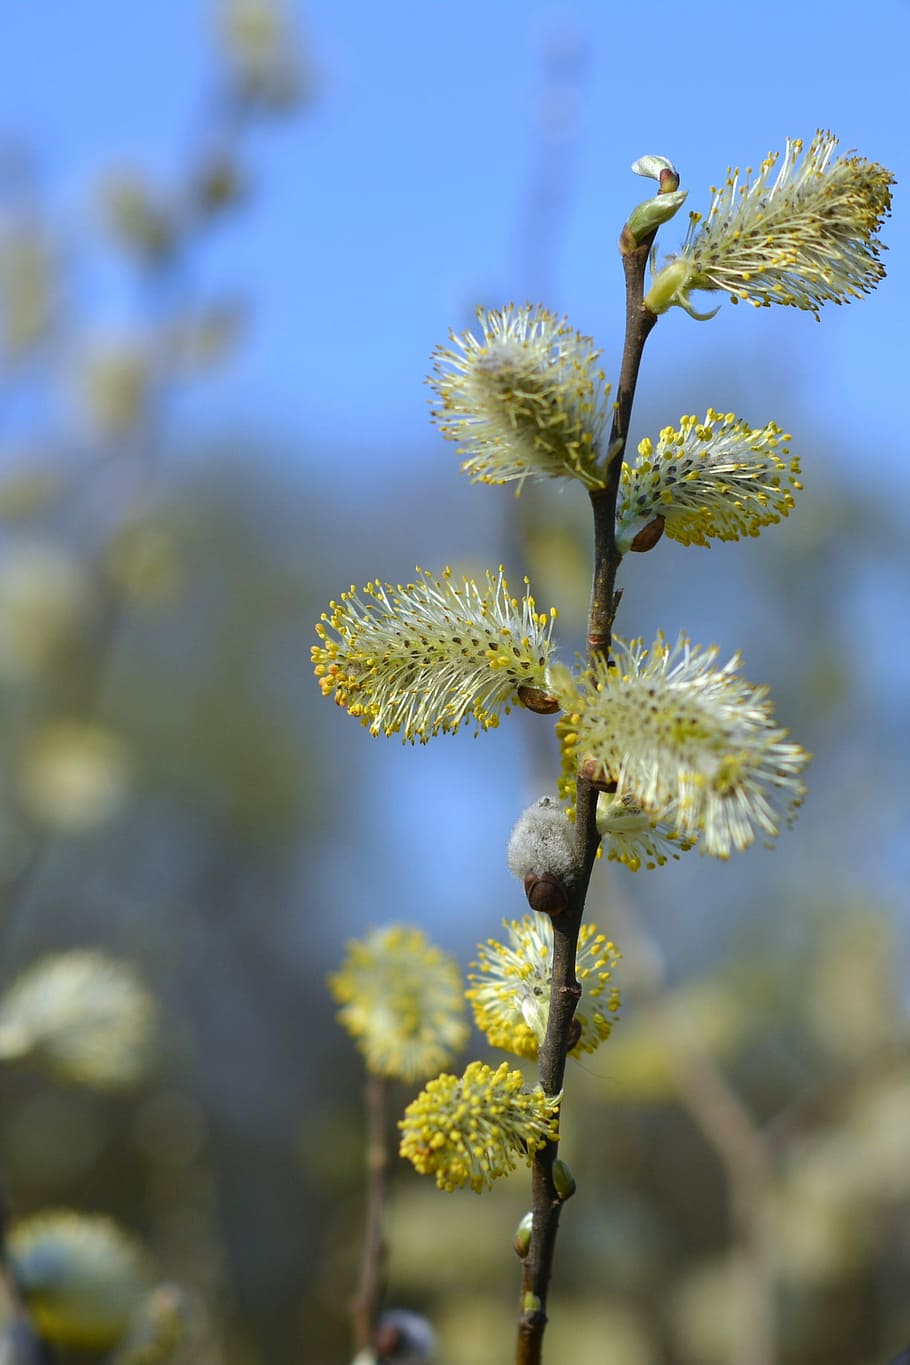 Basis, Willow, Catkins, the basis of, catkins willow, willow cats, HD wallpaper